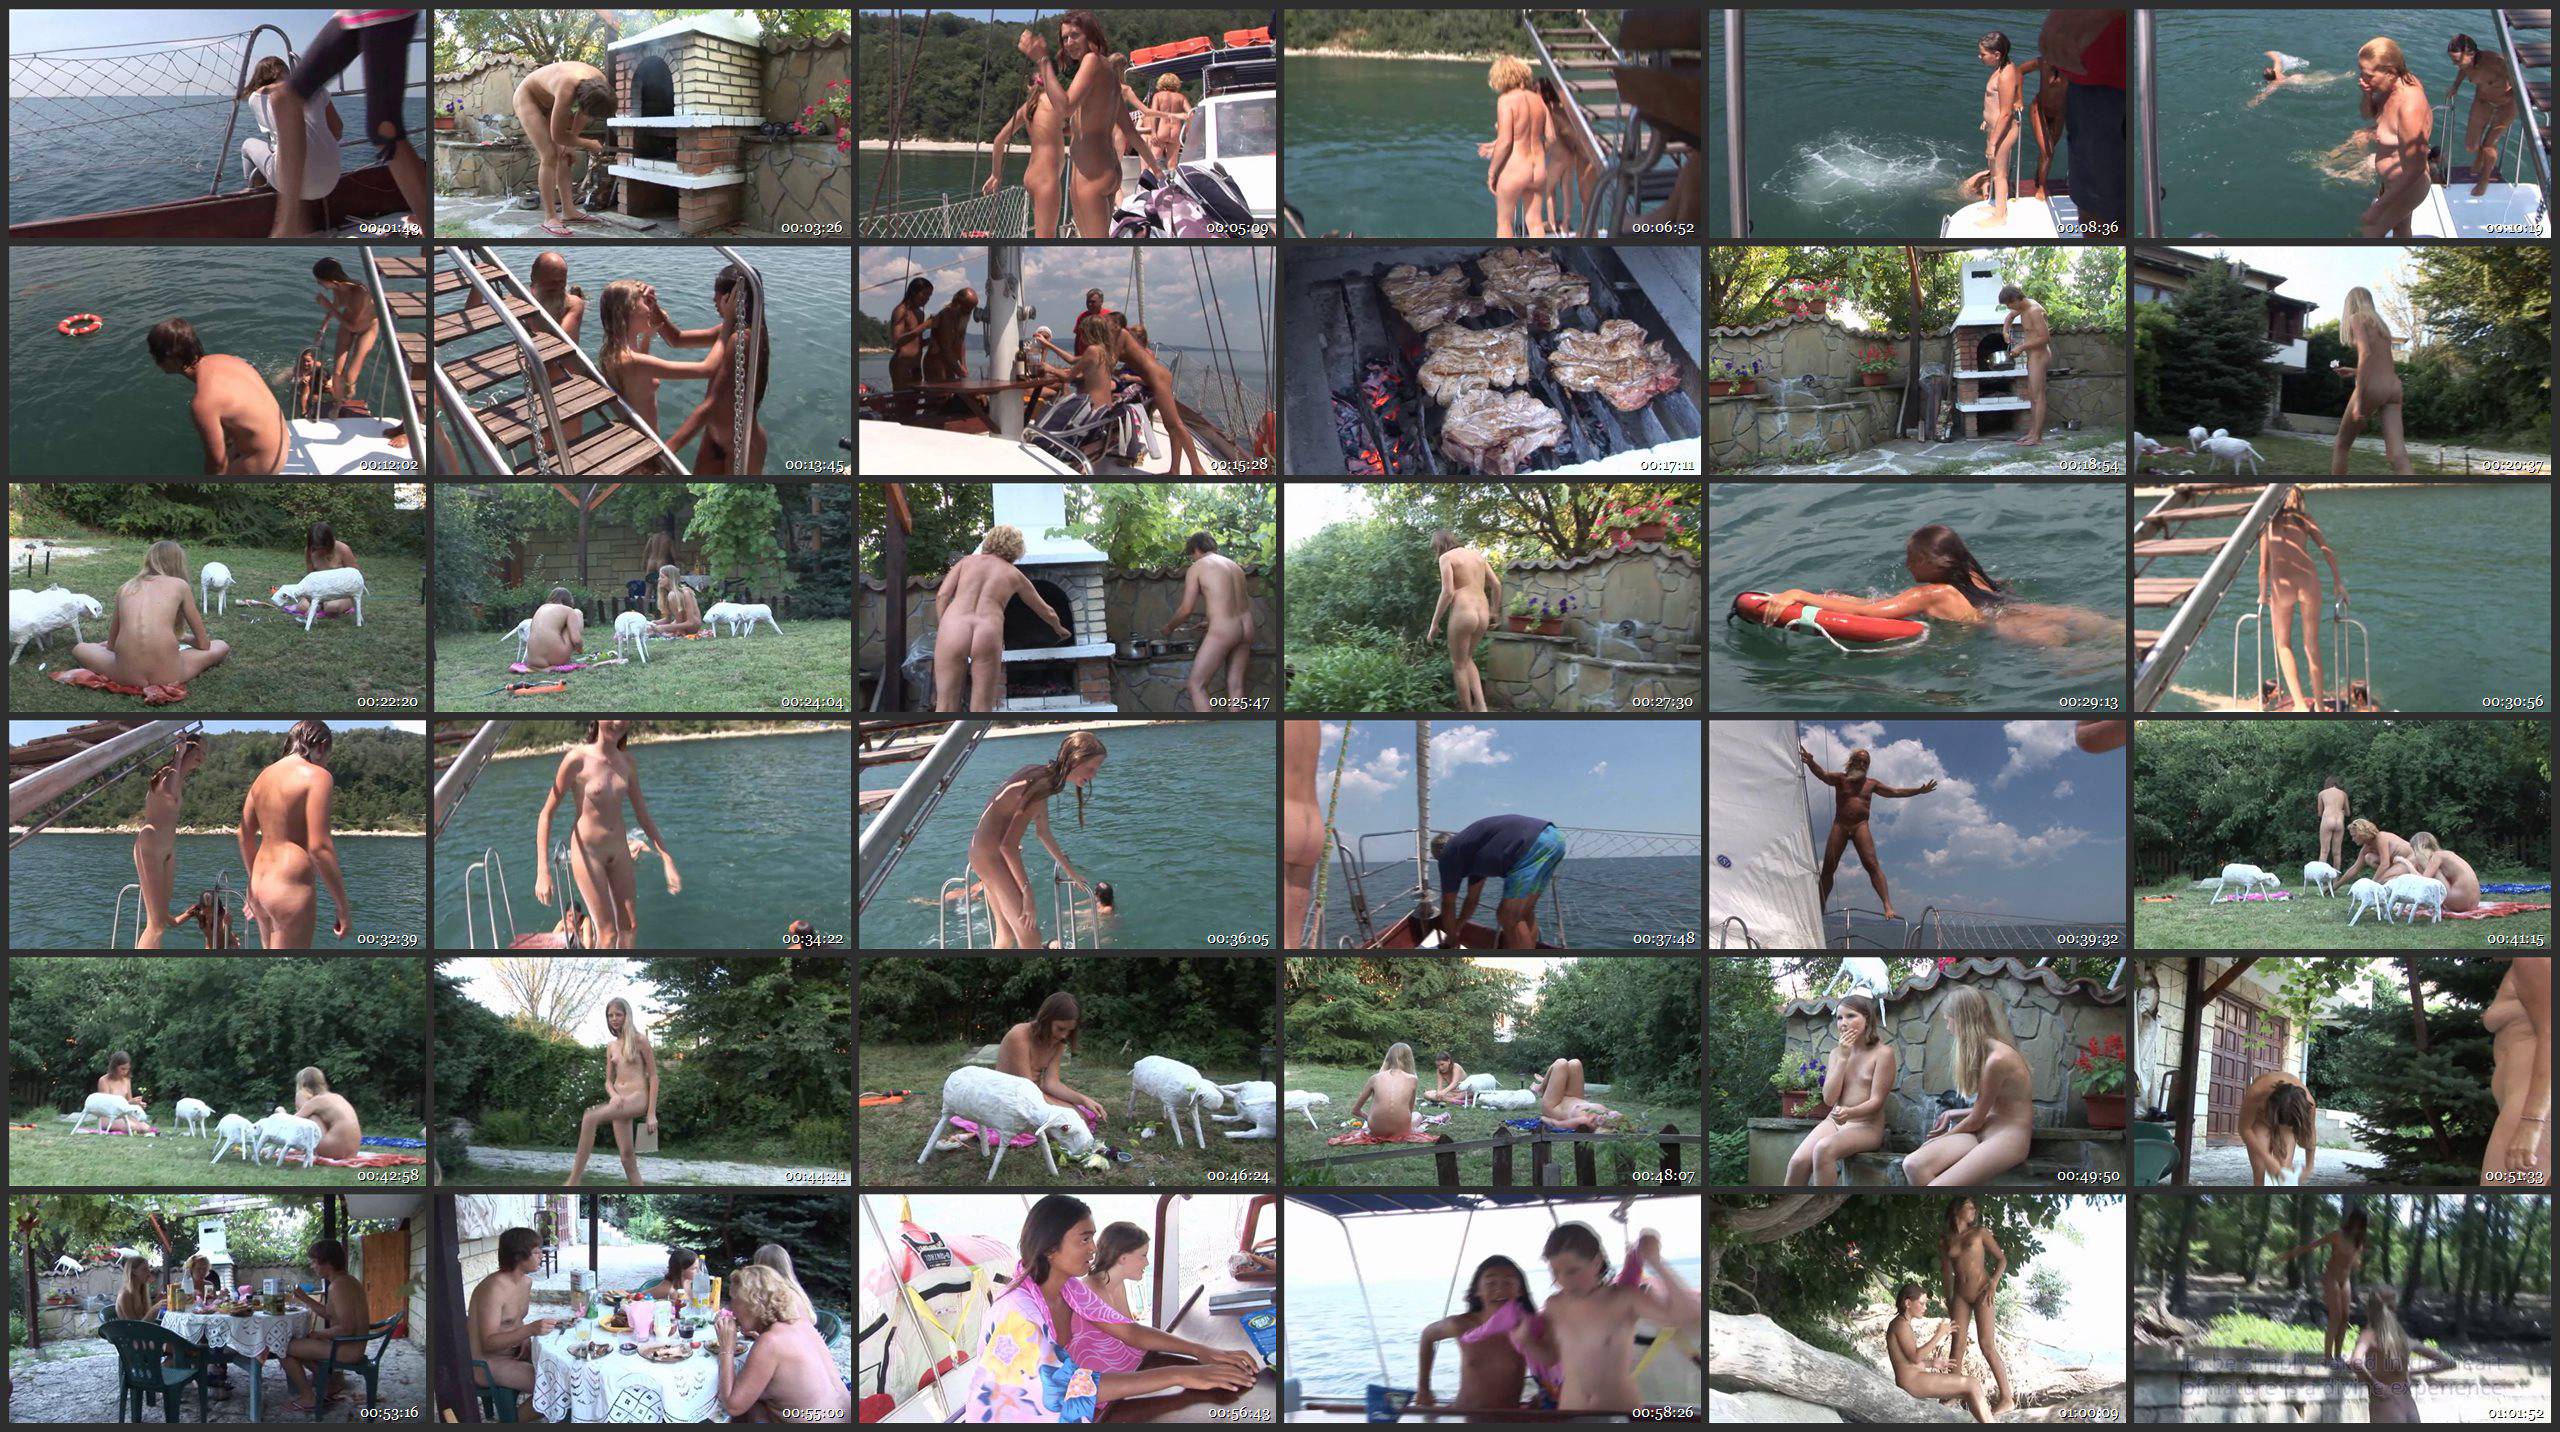 [Image: RussianBare-com-Yacht-and-Garden-Parties-Thumbnails.jpg]